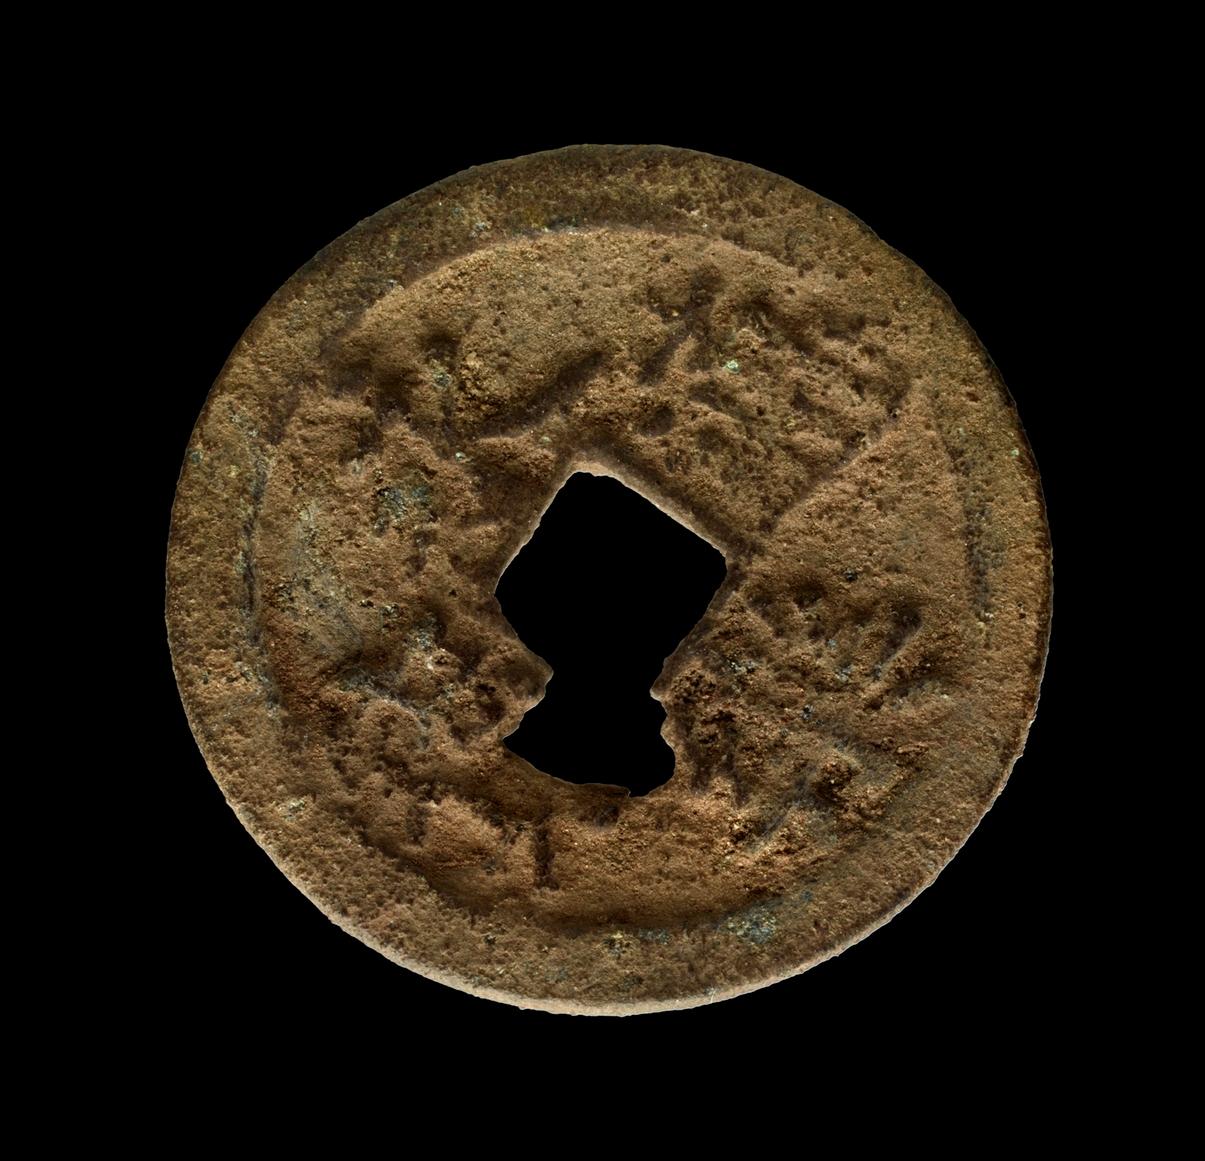 Chinese coin from early 1400s found in Kenya by the author